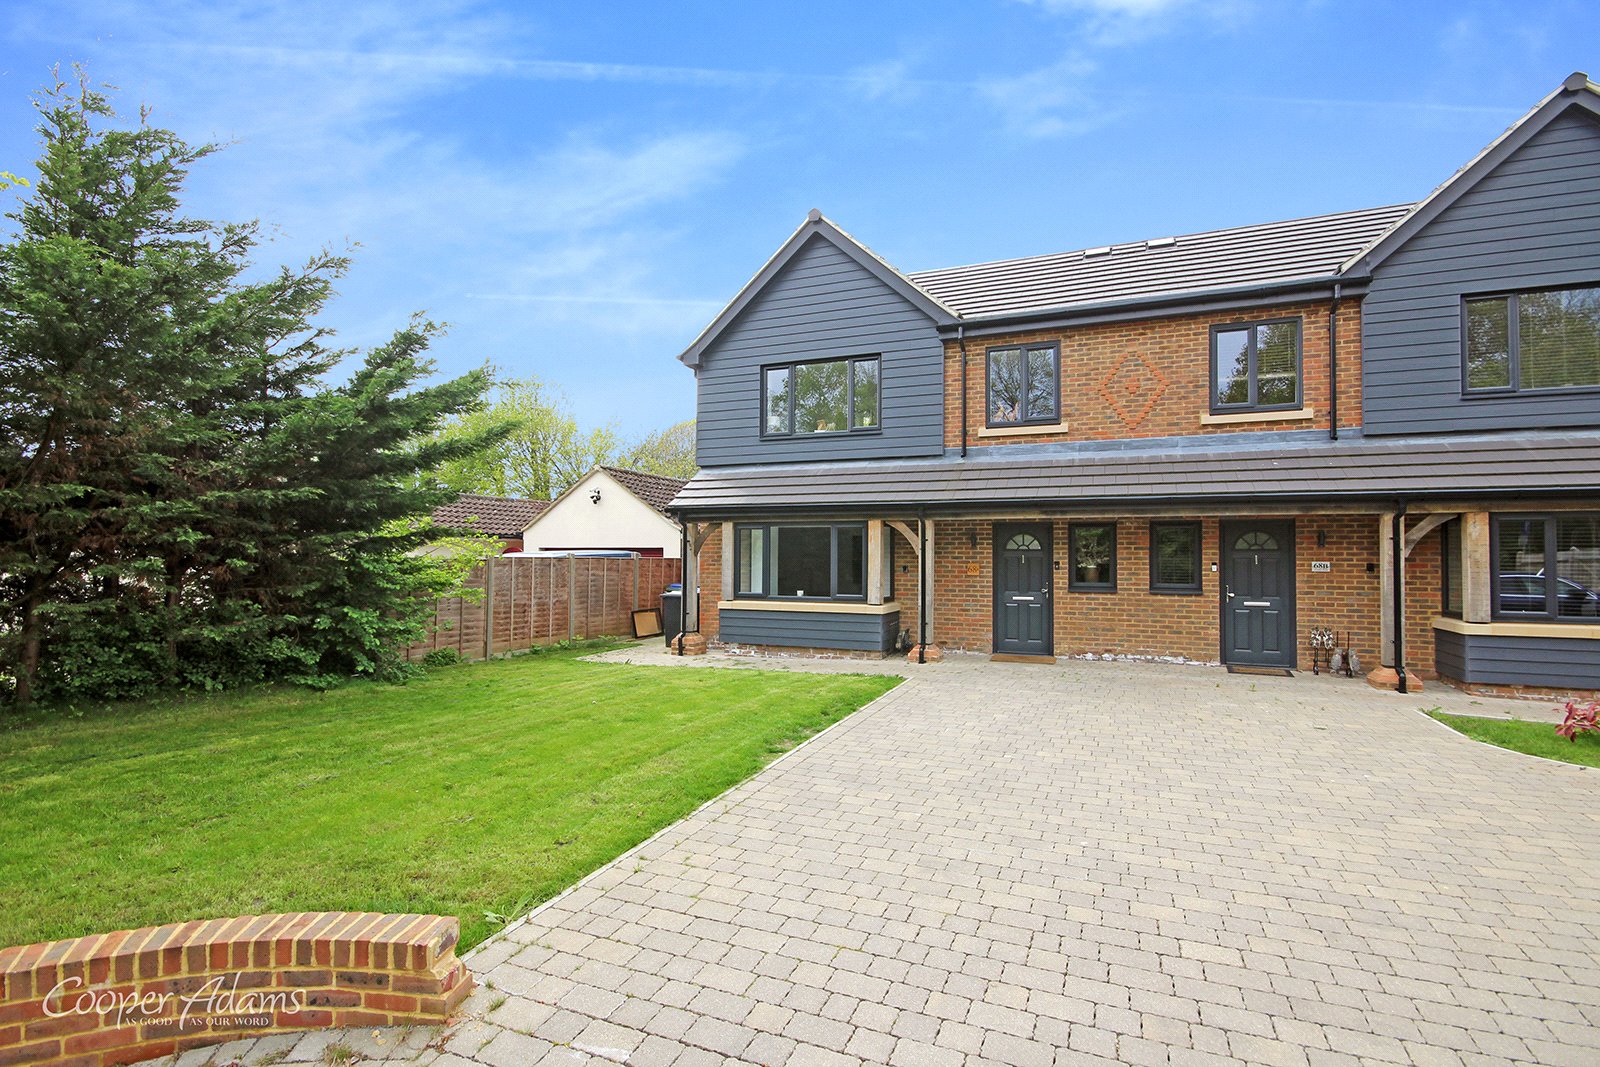 4 bed house for sale in Arundel Road, Angmering  - Property Image 1